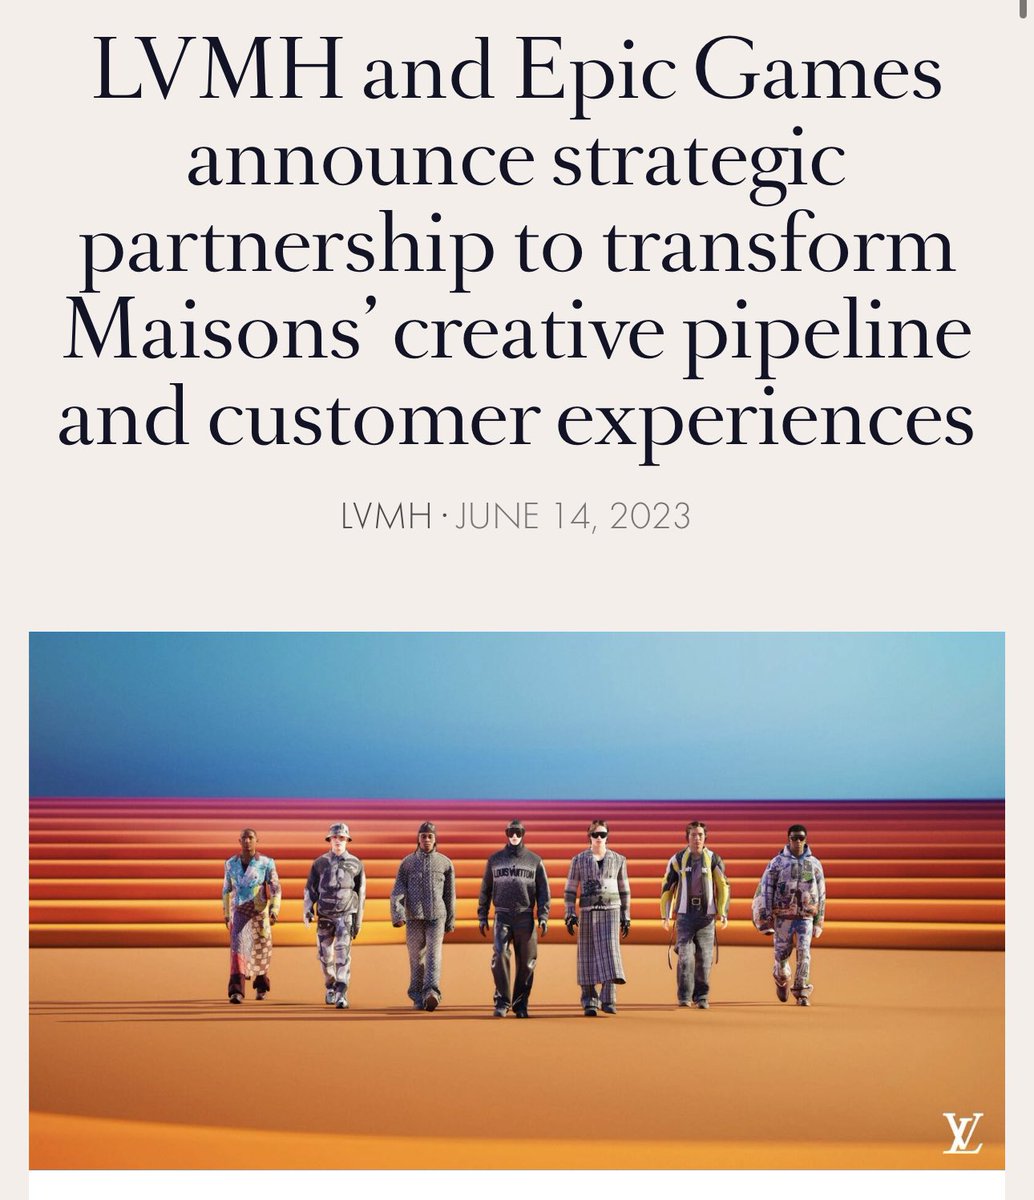 LVMH's partnership with Epic Games brings immersive experiences to customers w virtual fitting rooms, fashion shows, and AR. Collaboration unlocks growth opportunities using 3D tools, enhancing LVMH's capabilities and engaging Gen Z #ImmersiveExperiences 
lvmh.com/news-documents…